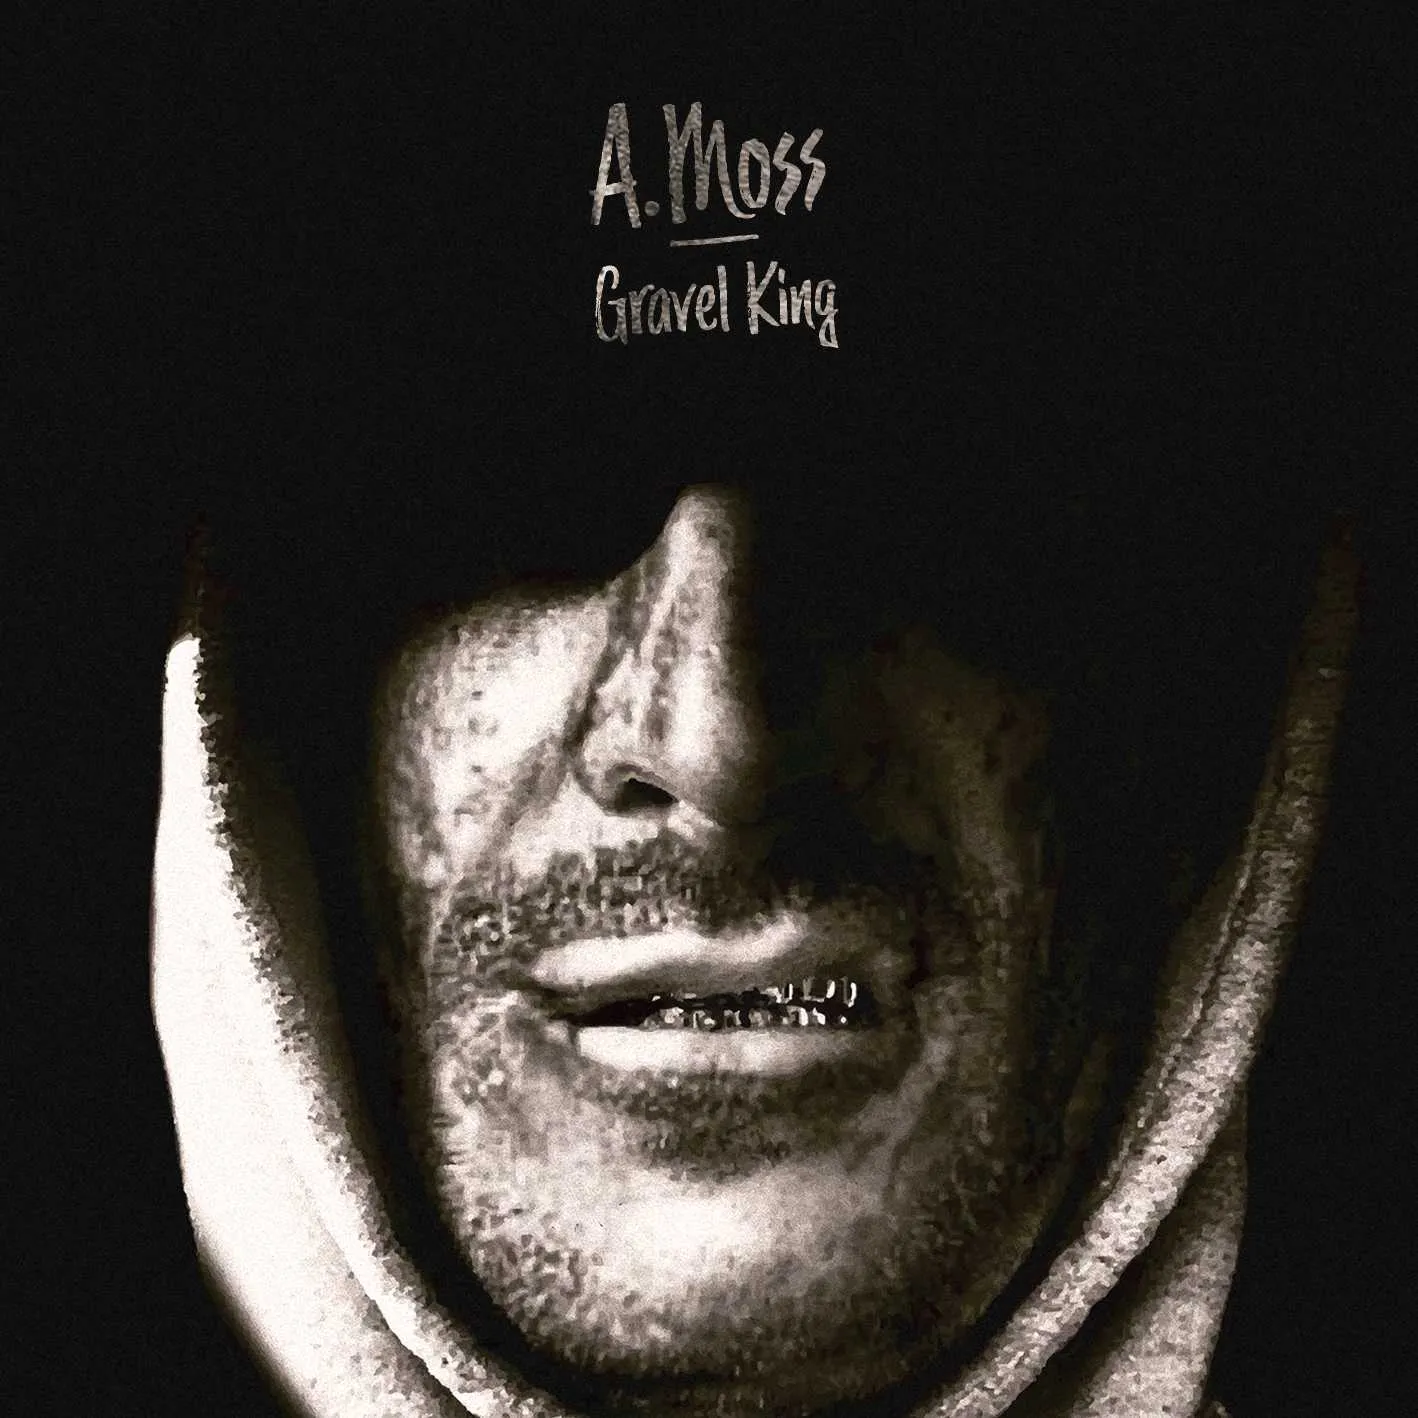 Album cover for “Gravel King” by A.Moss